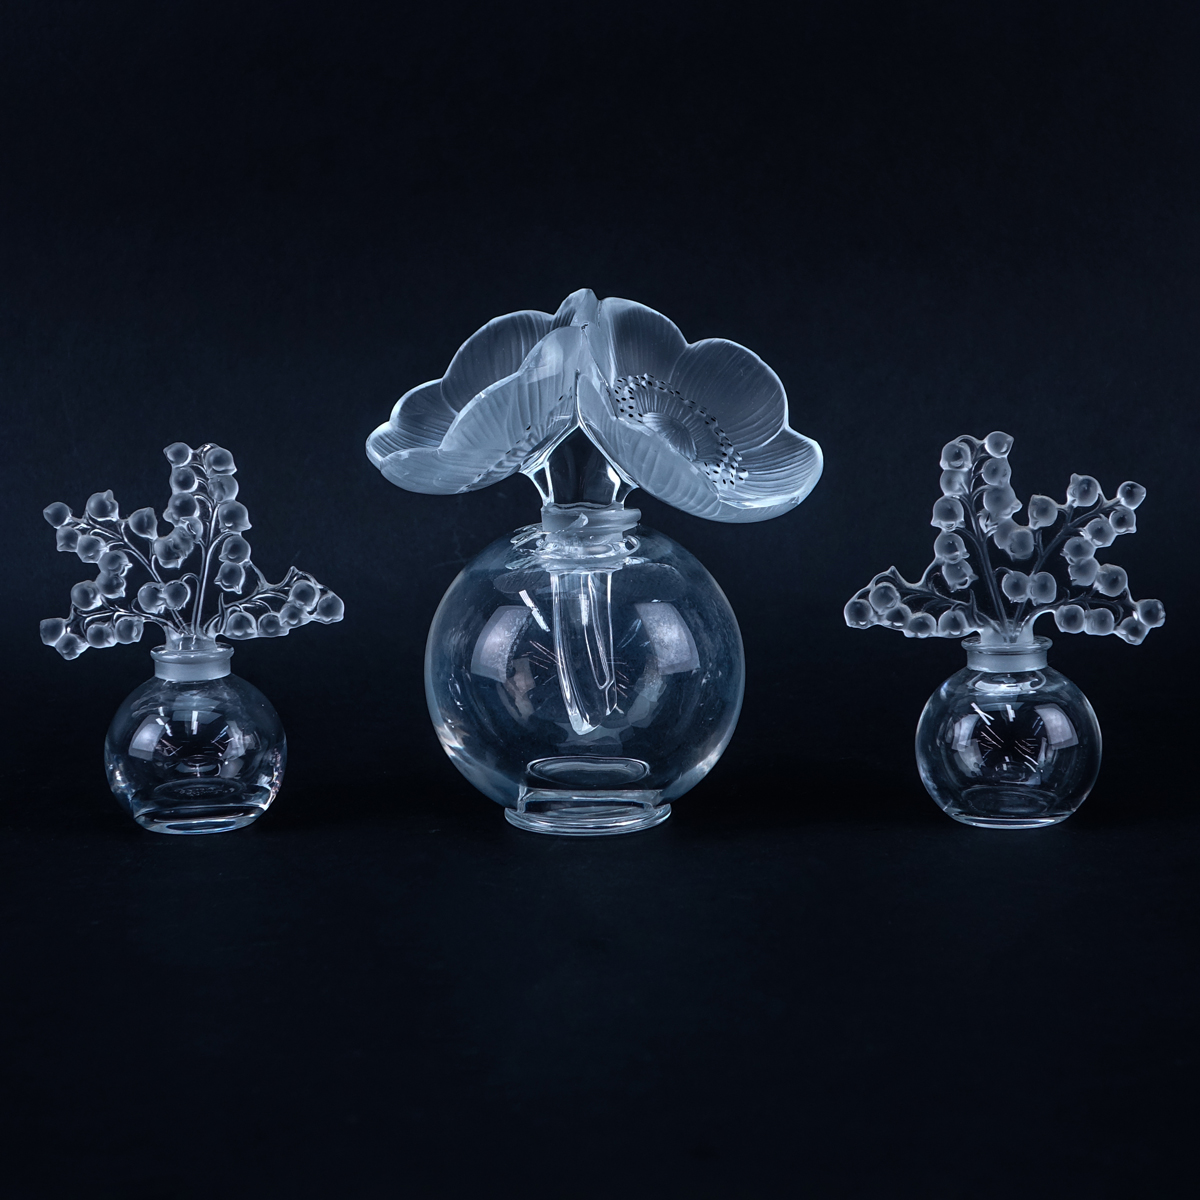 Group of Three (3): Pair of Lalique "Lily of the Valley" Crystal Perfume Bottles, Large Lalique "Anemone" Crystal Perfume Bottle. Each appropriately signed to base.